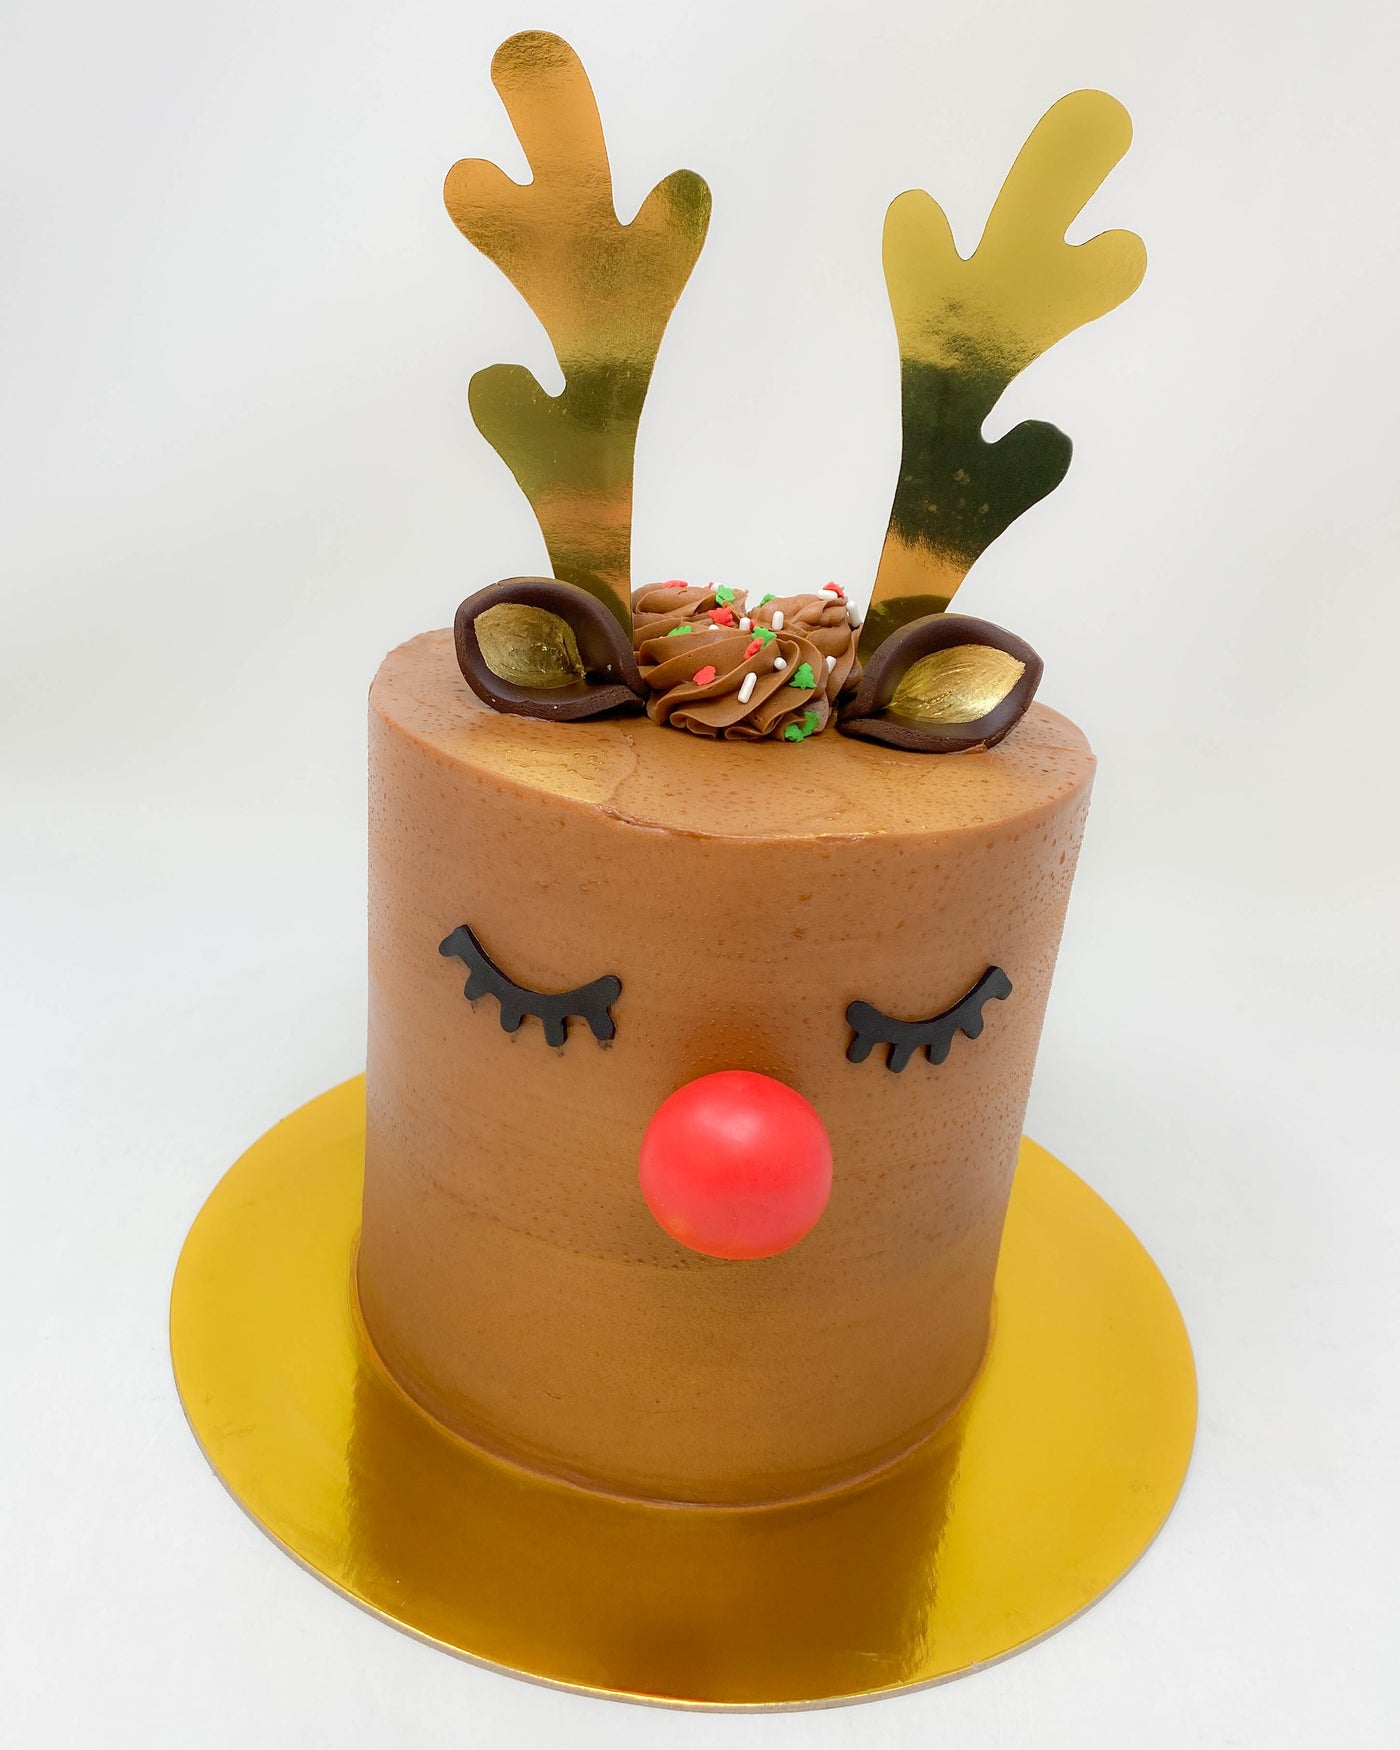 Rudolph the red nosed reindeer cake